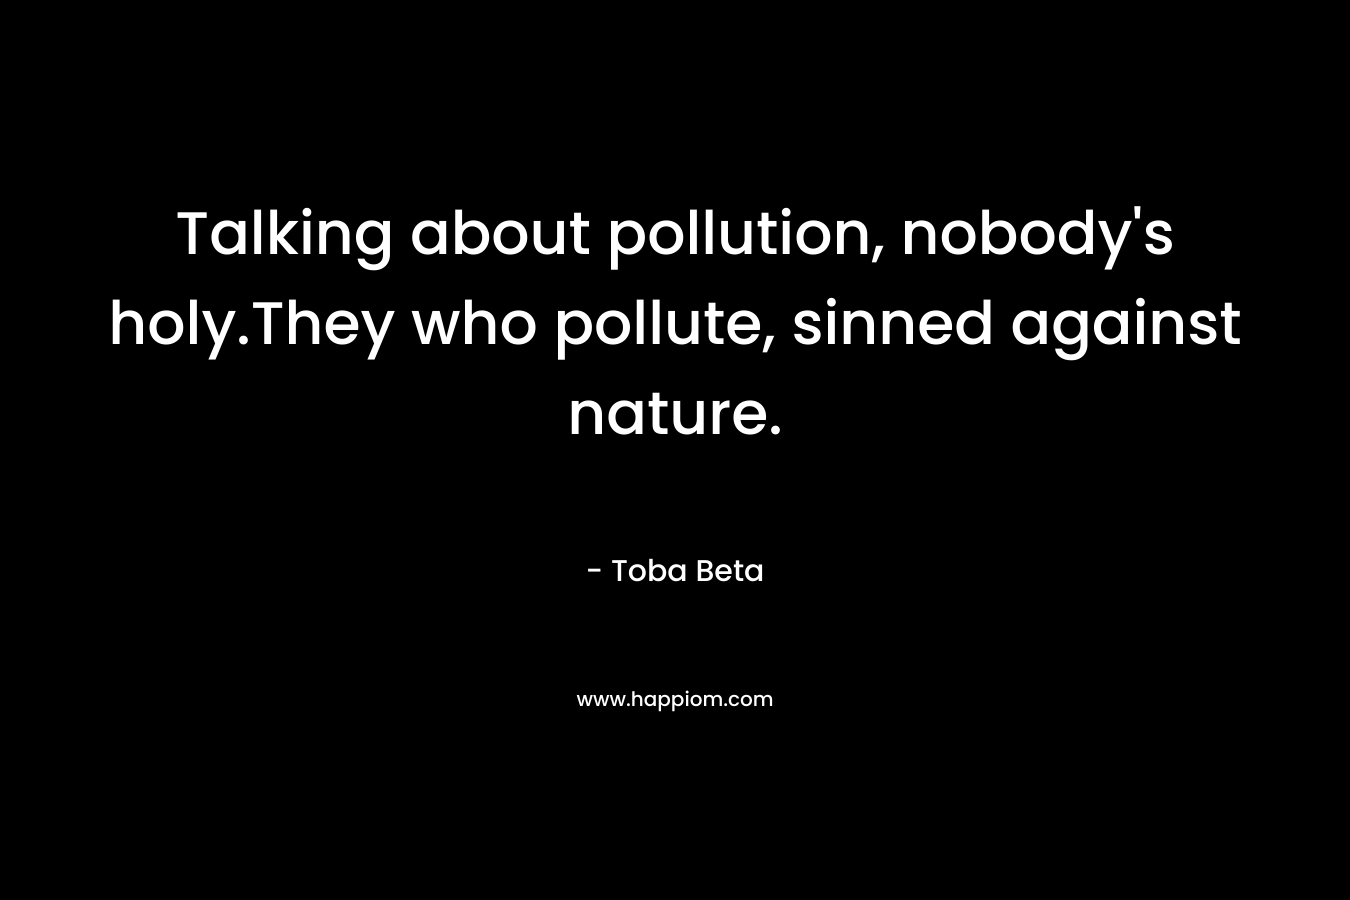 Talking about pollution, nobody’s holy.They who pollute, sinned against nature. – Toba Beta